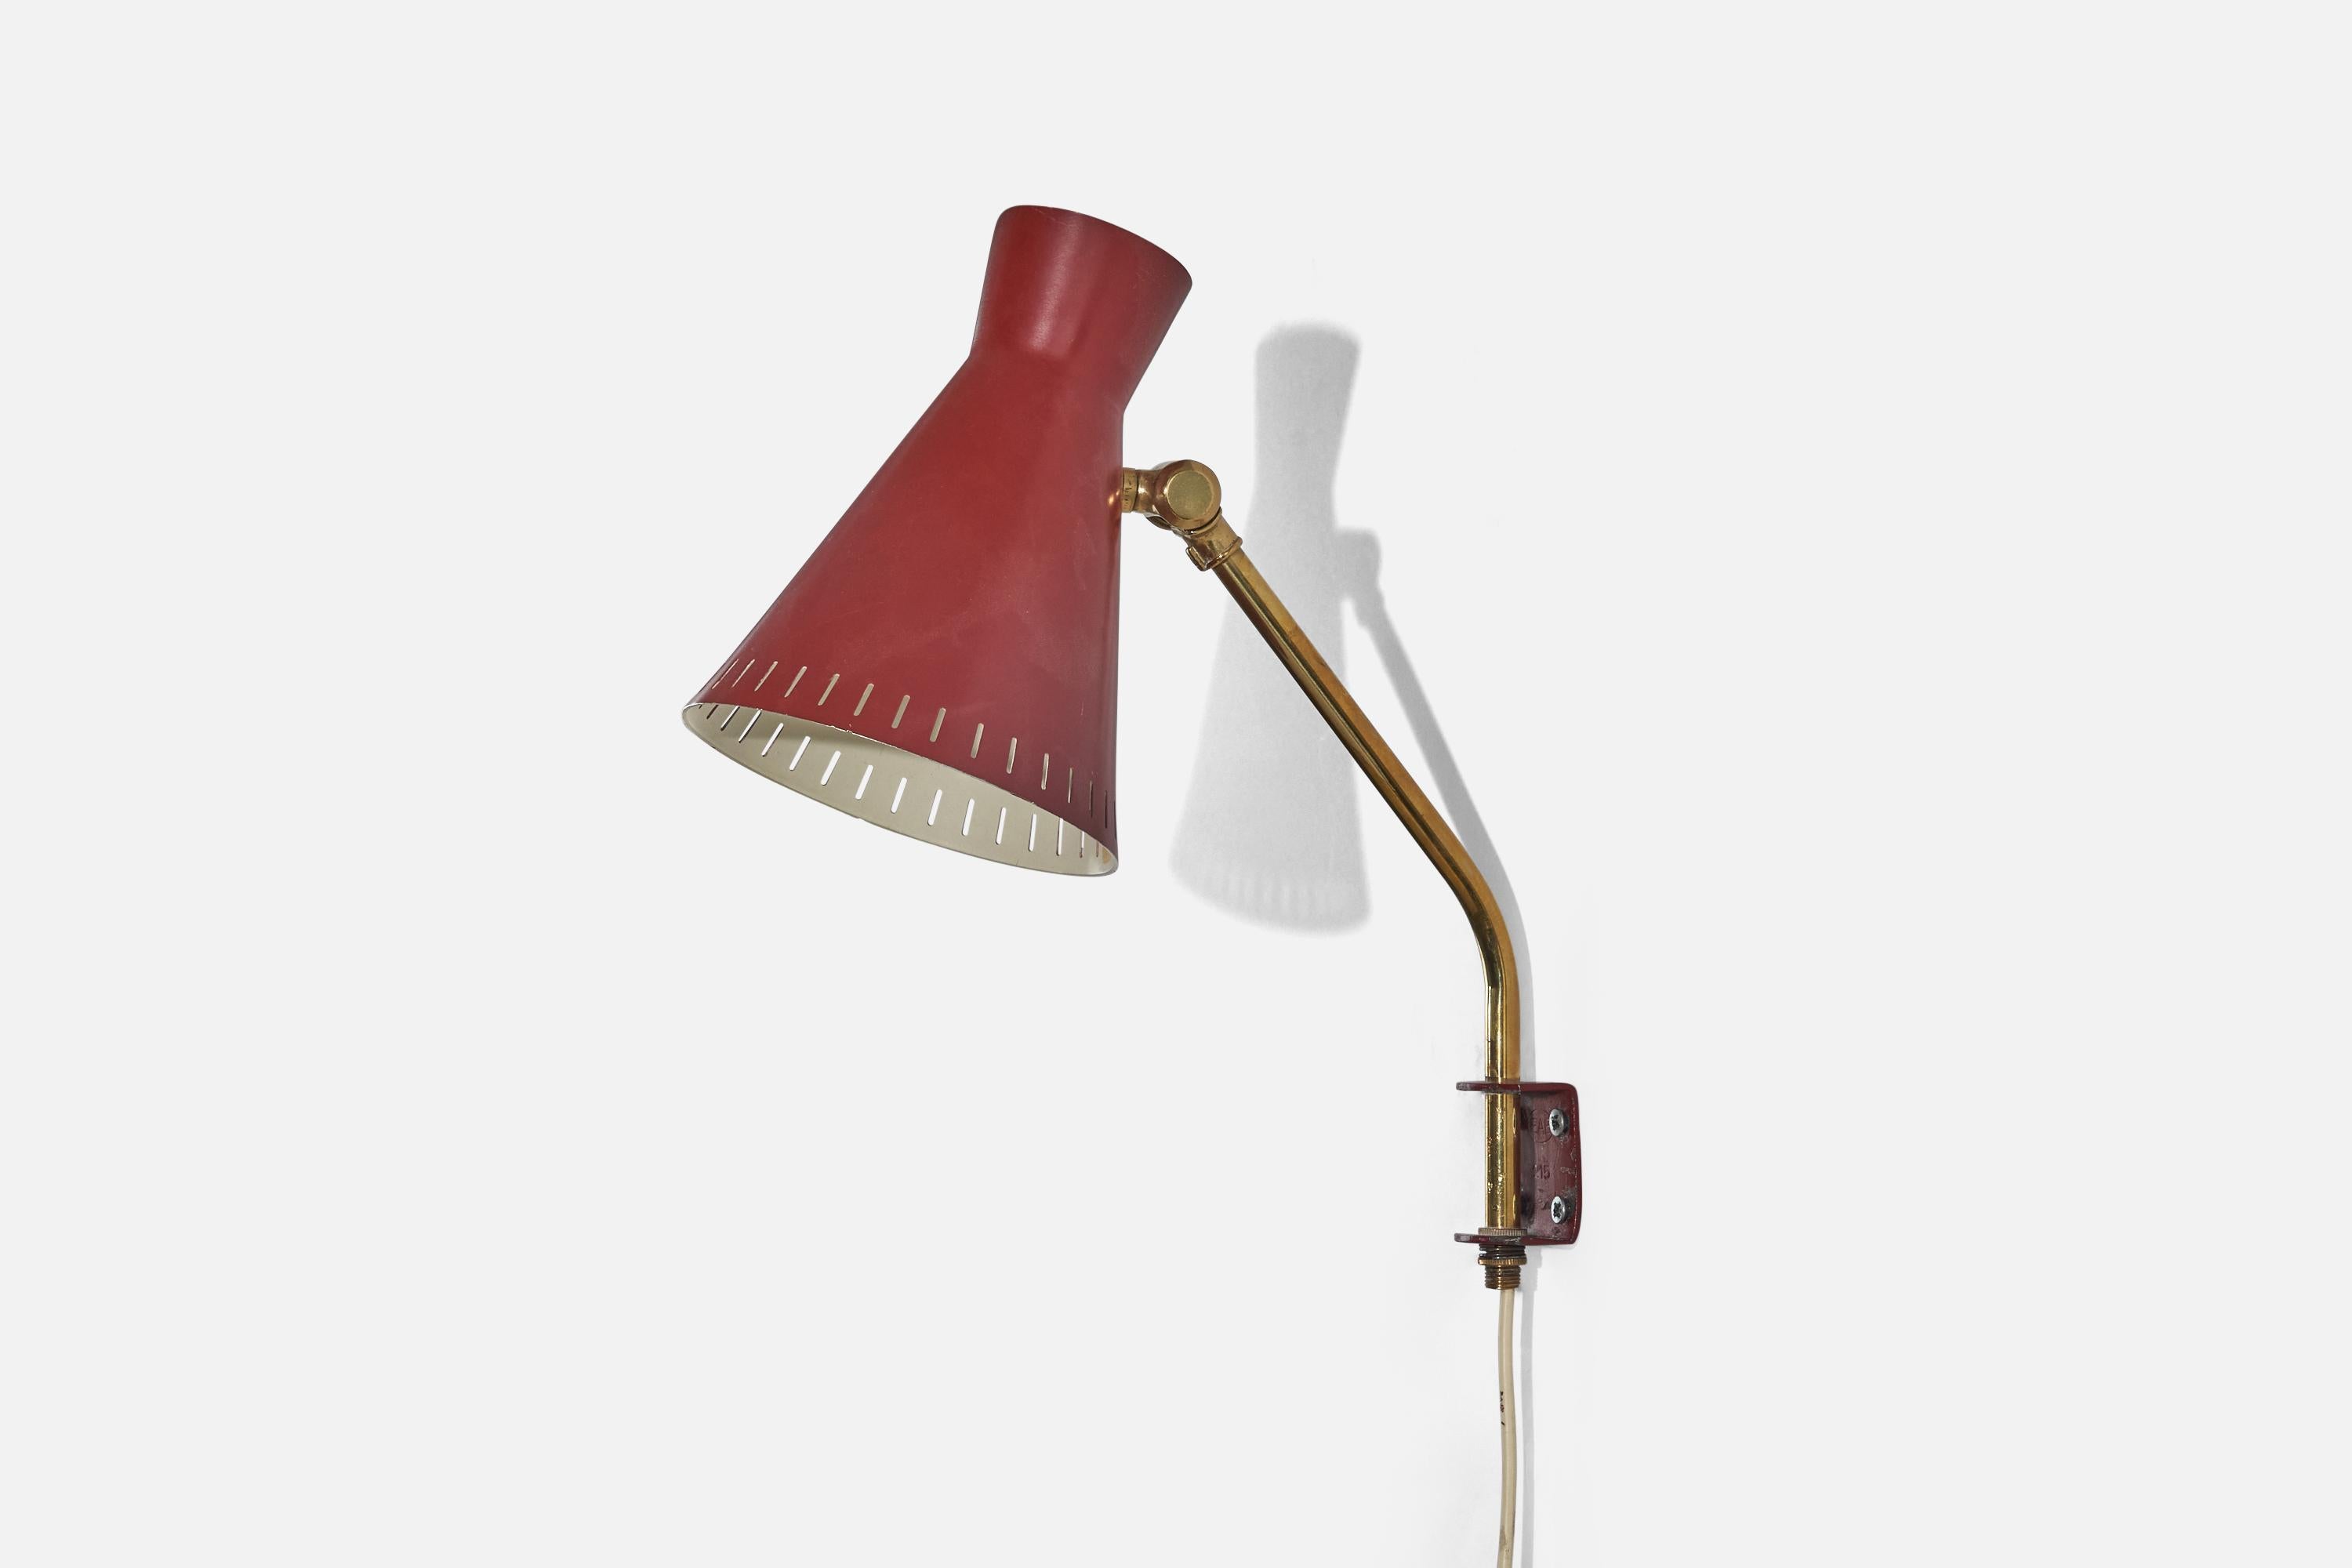 Mid-20th Century Swedish Designer, Wall Light, Brass, Red Lacquered Metal, Sweden, c. 1940s For Sale